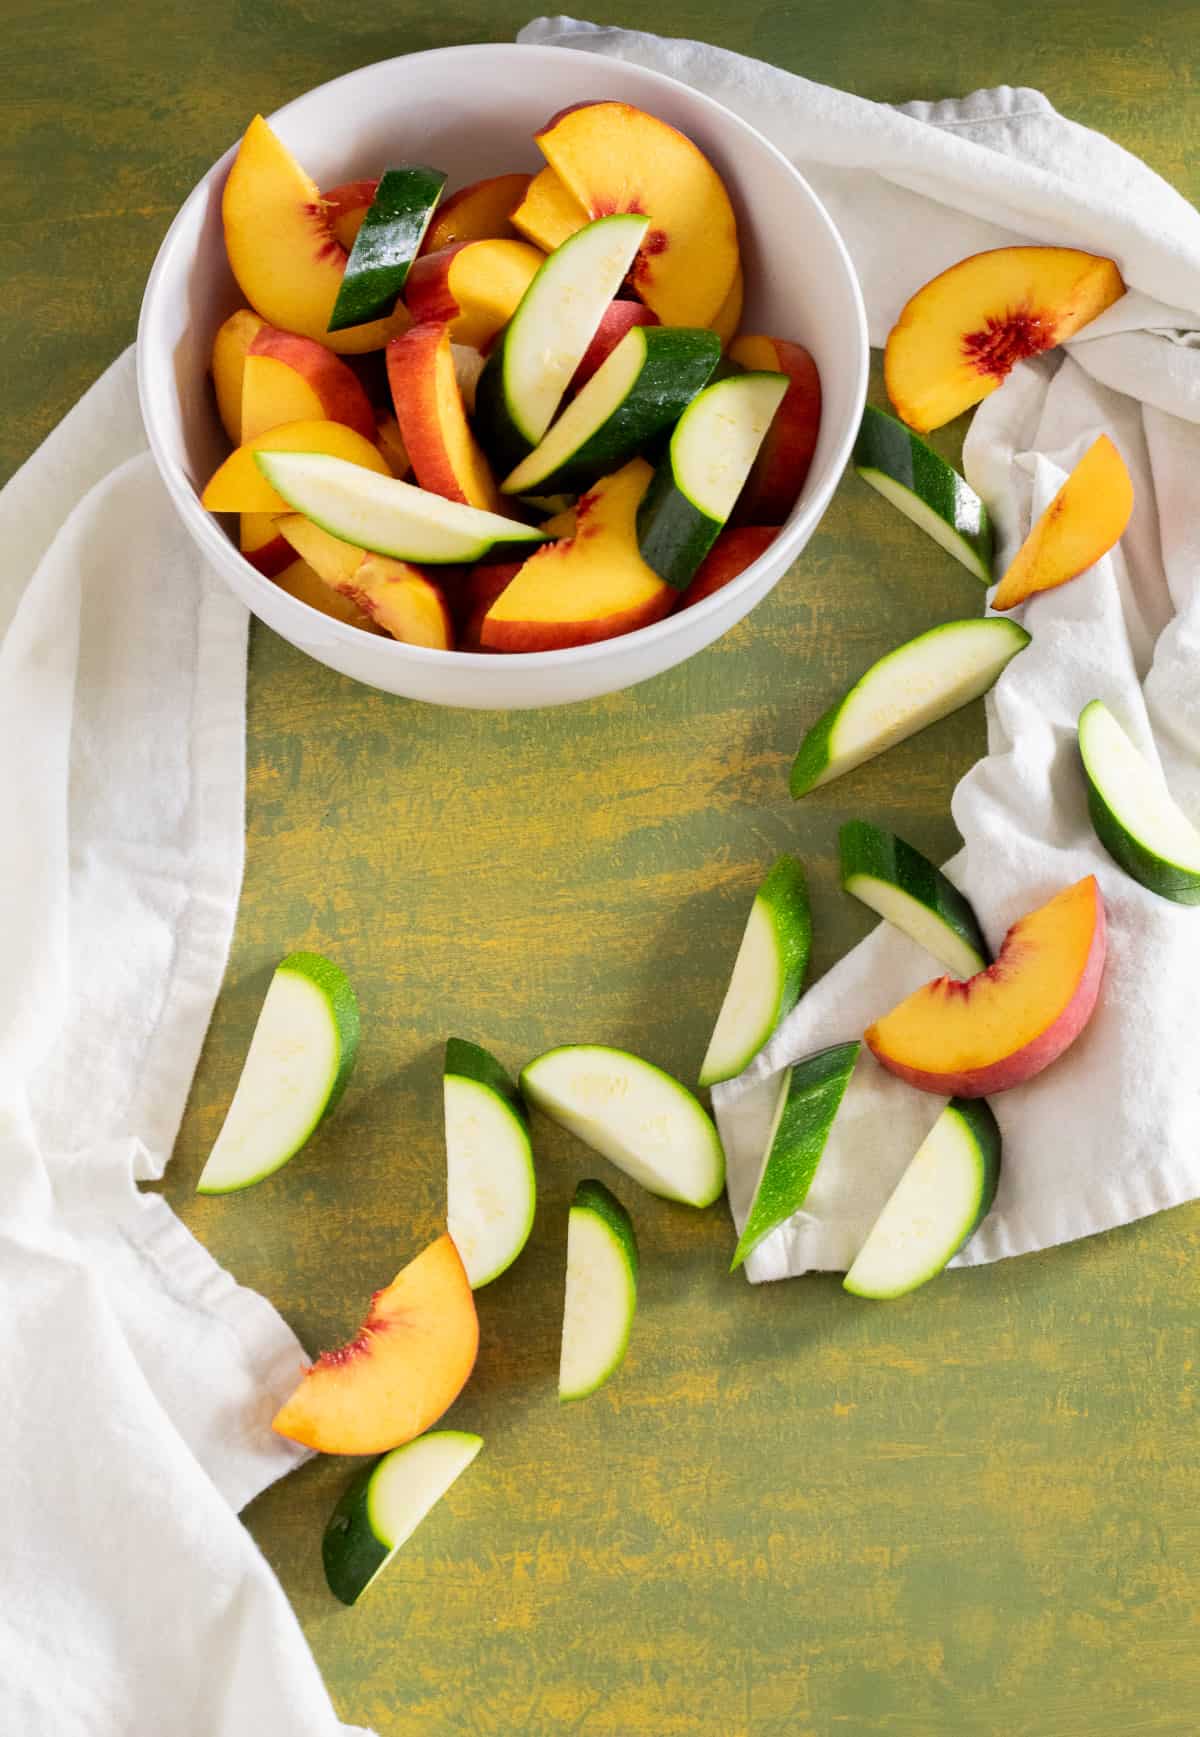 Peaches and zucchini are sliced in large enough pieces to nit fall through the grill grates and scattered over a green surface.